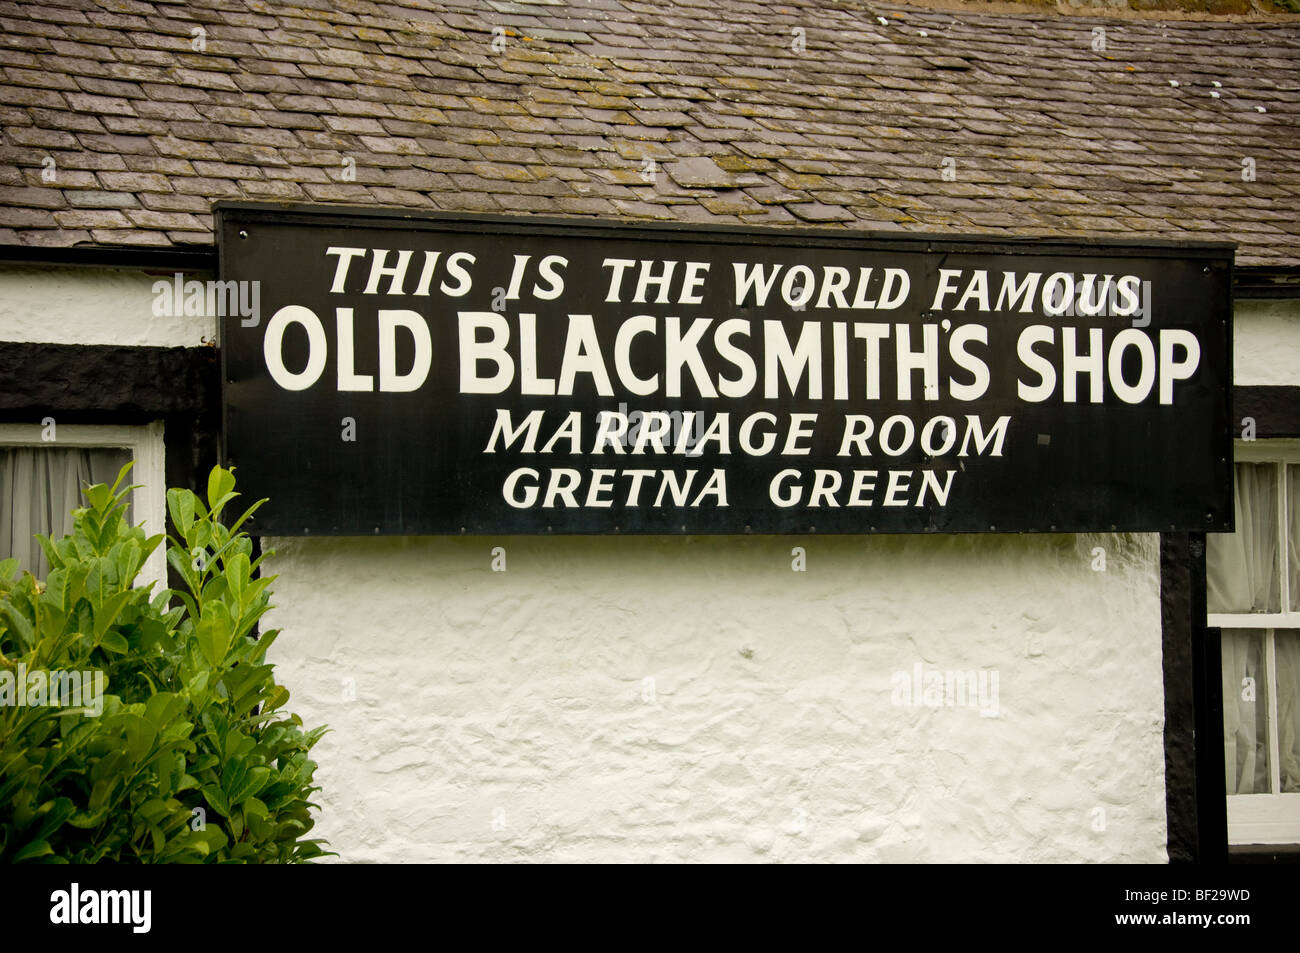 Closeup of an exterior sign for the Marriage room at the Old Blacksmith's Shop, Gretna Green, Scotland, UK Stock Photo